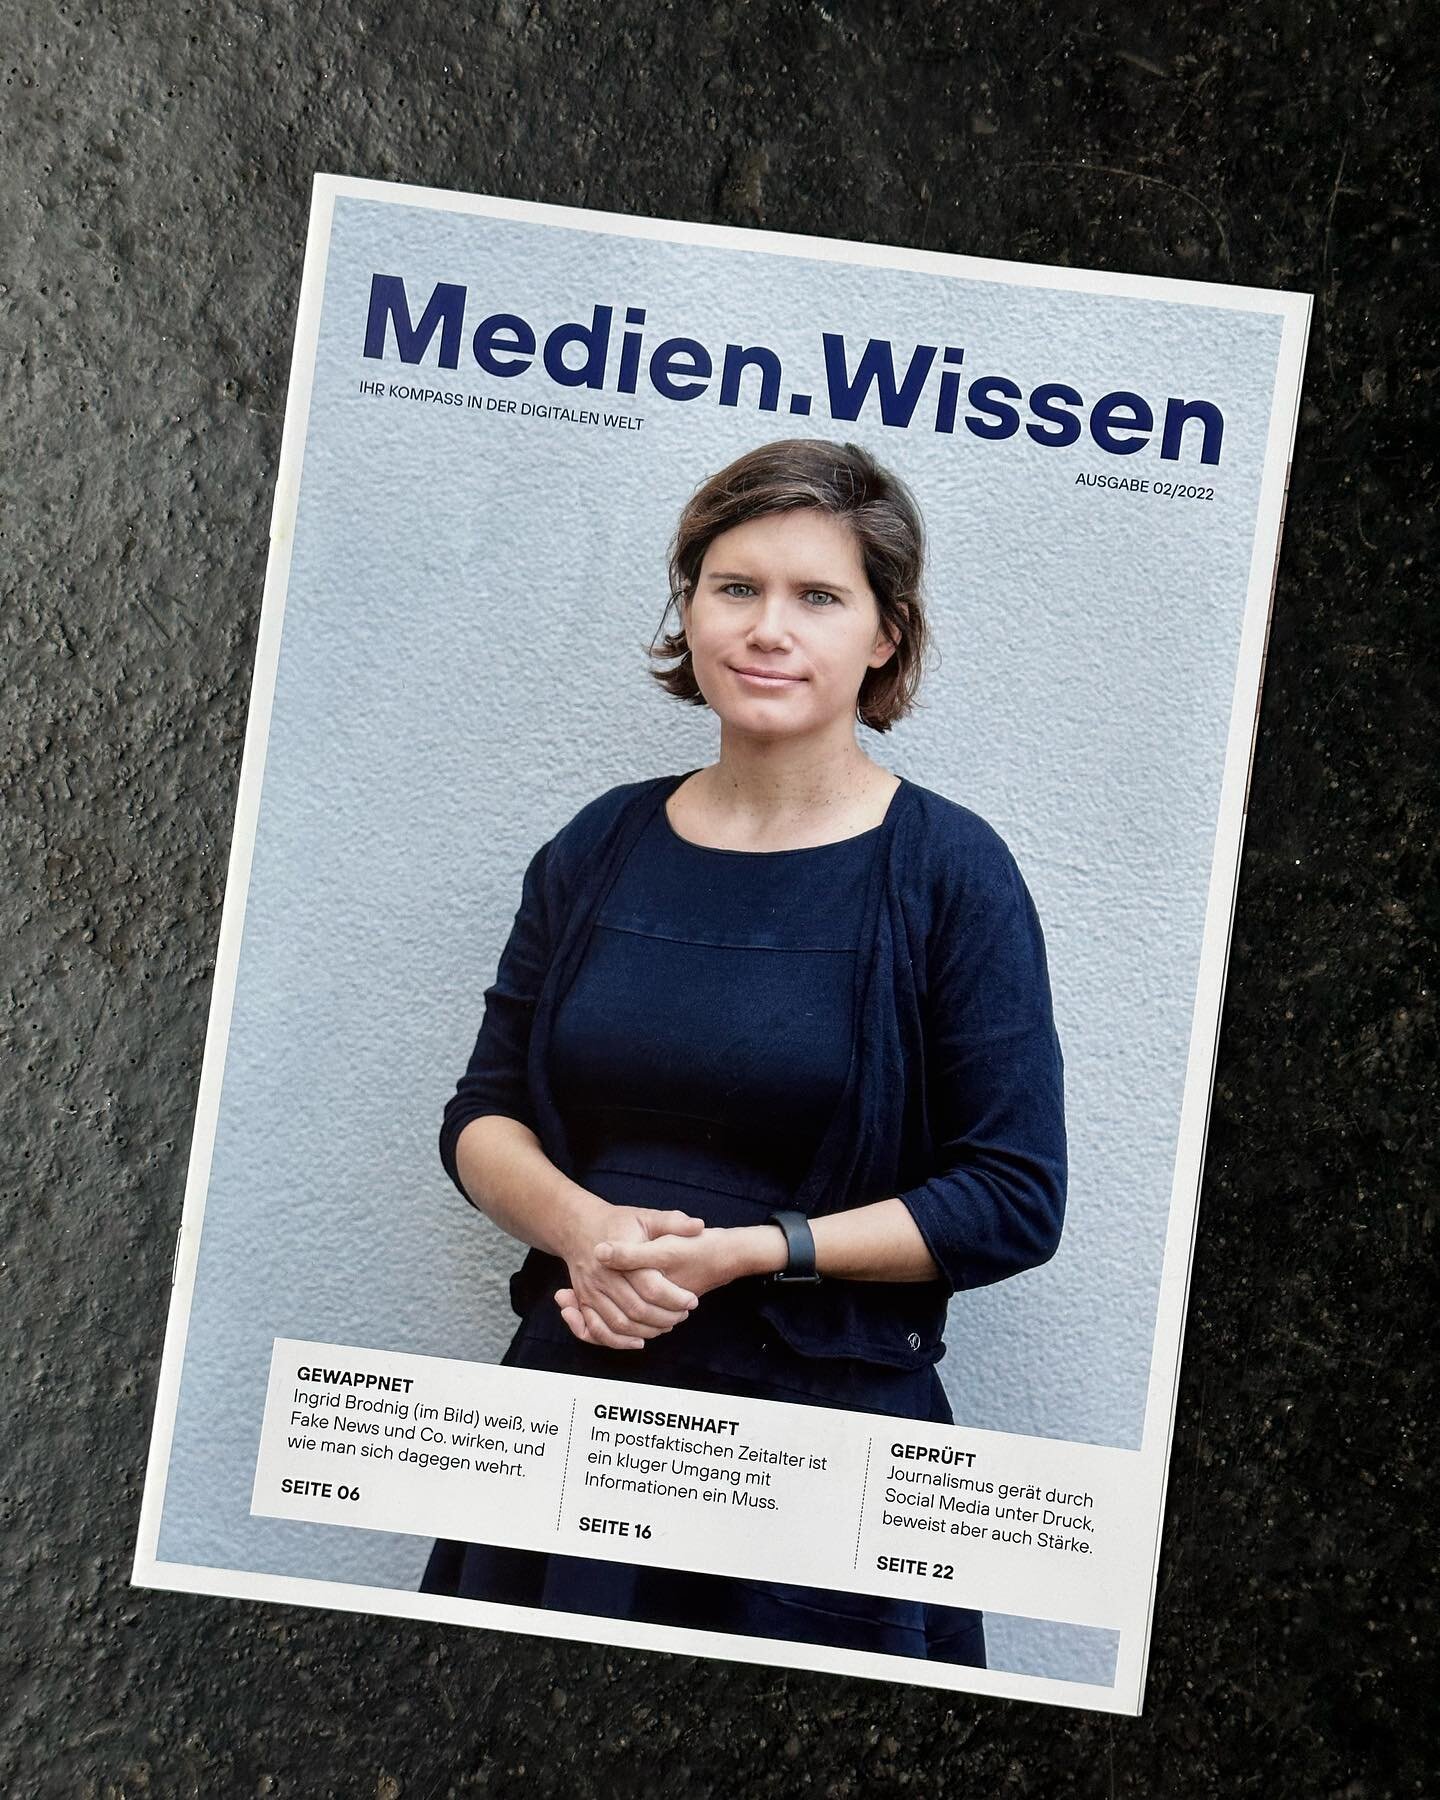 Ingrid Brodnig for Medien.Wissen.
She's a true expert when it comes to the influence digitalization has on people / society and the informative work she's doing around the topic of fake news is truly important.
@brodnig @wienerzeitung 

#potrait #mag